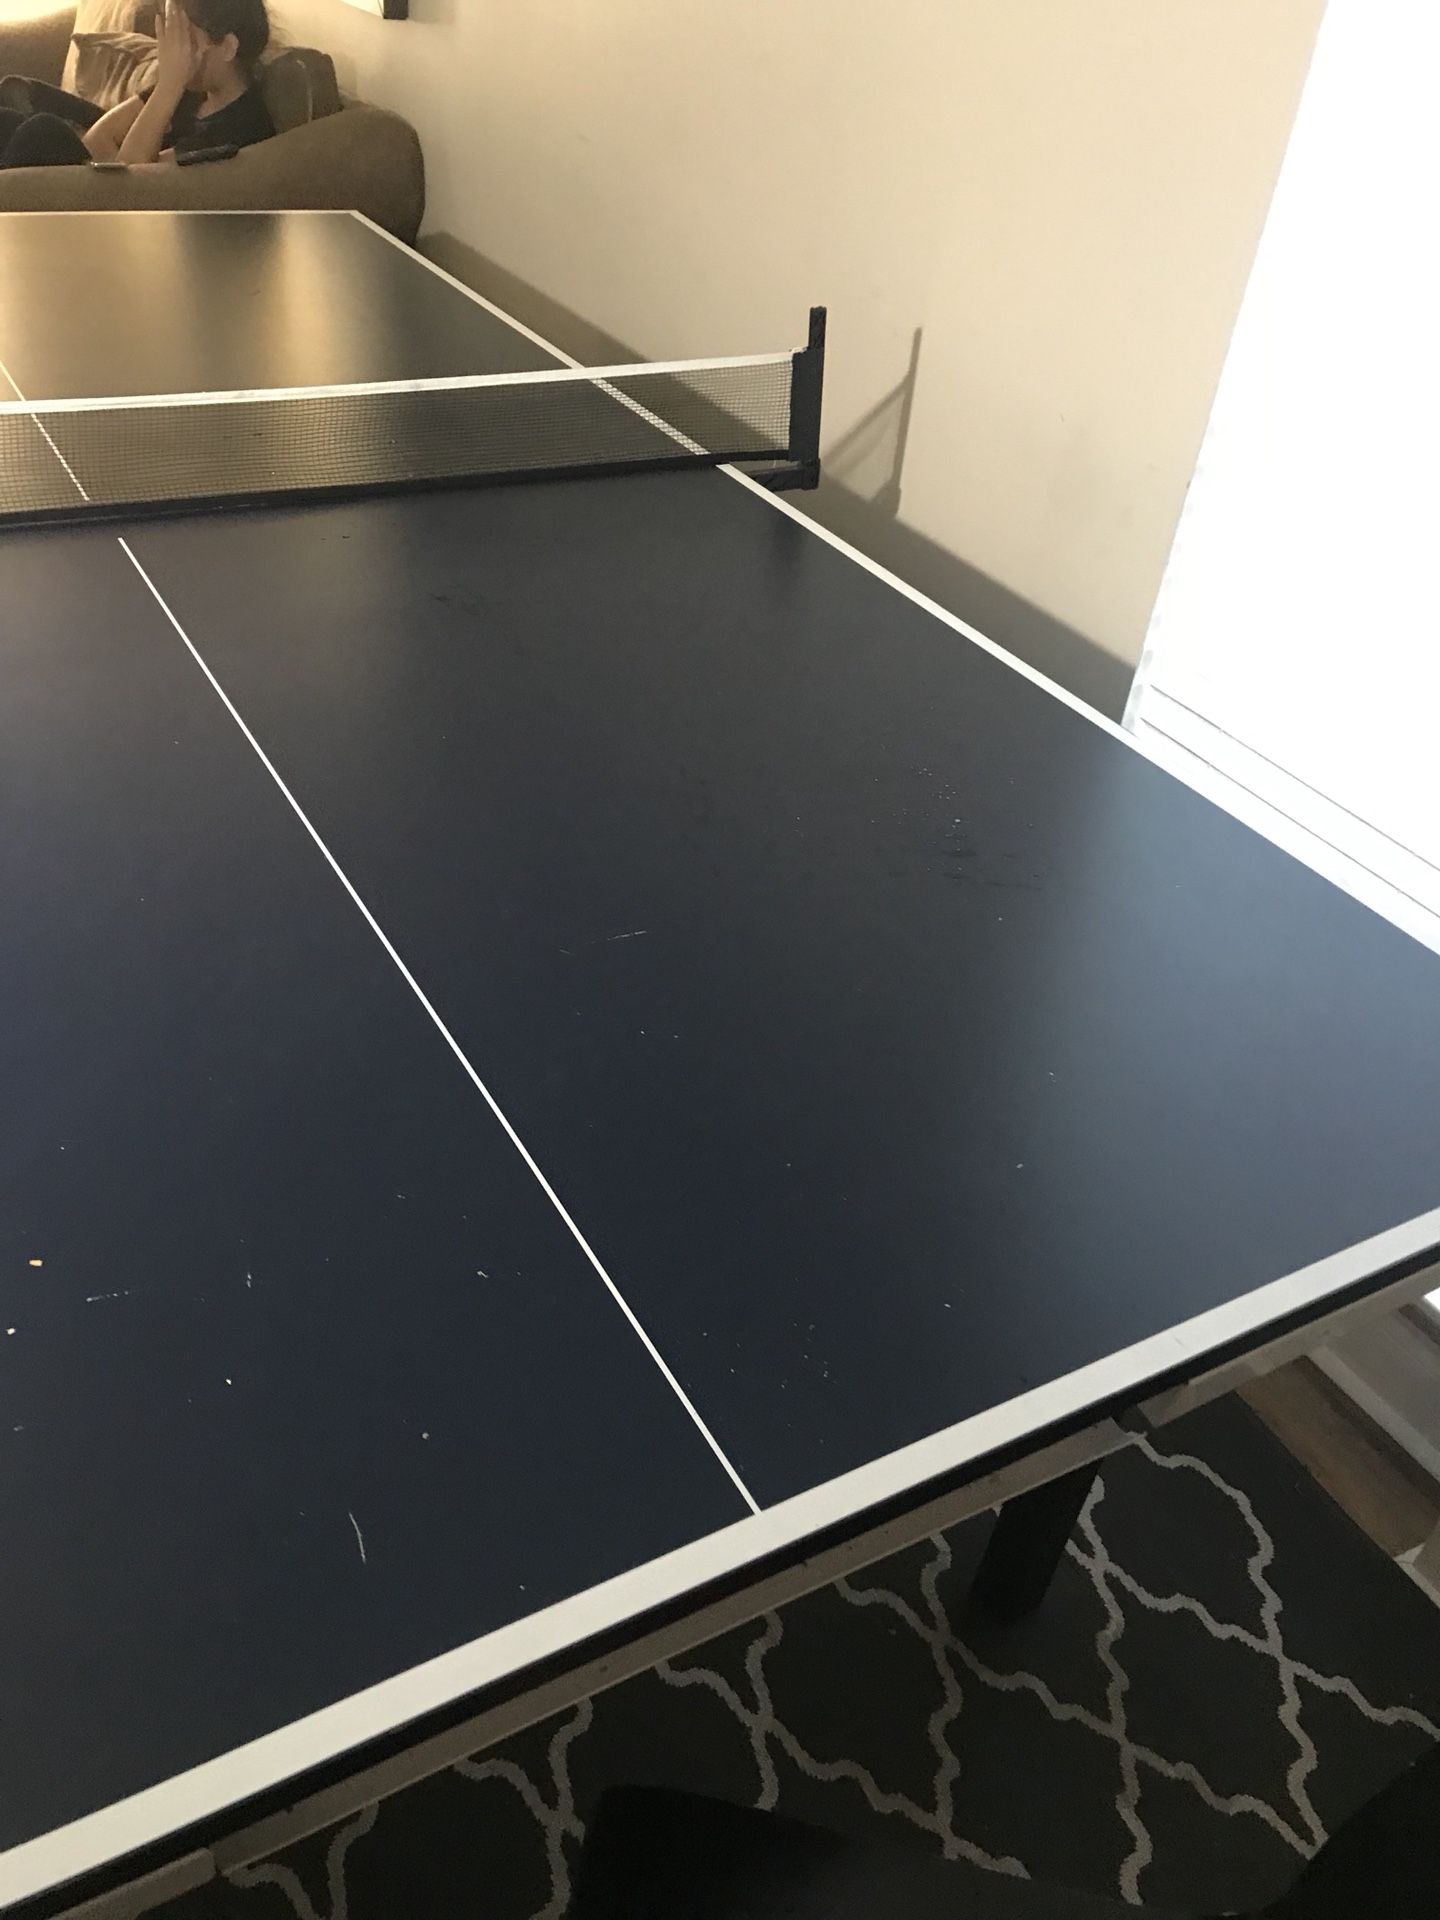 Ping Pong / Table Tennis Table For Sale for Sale in Houston, TX - OfferUp